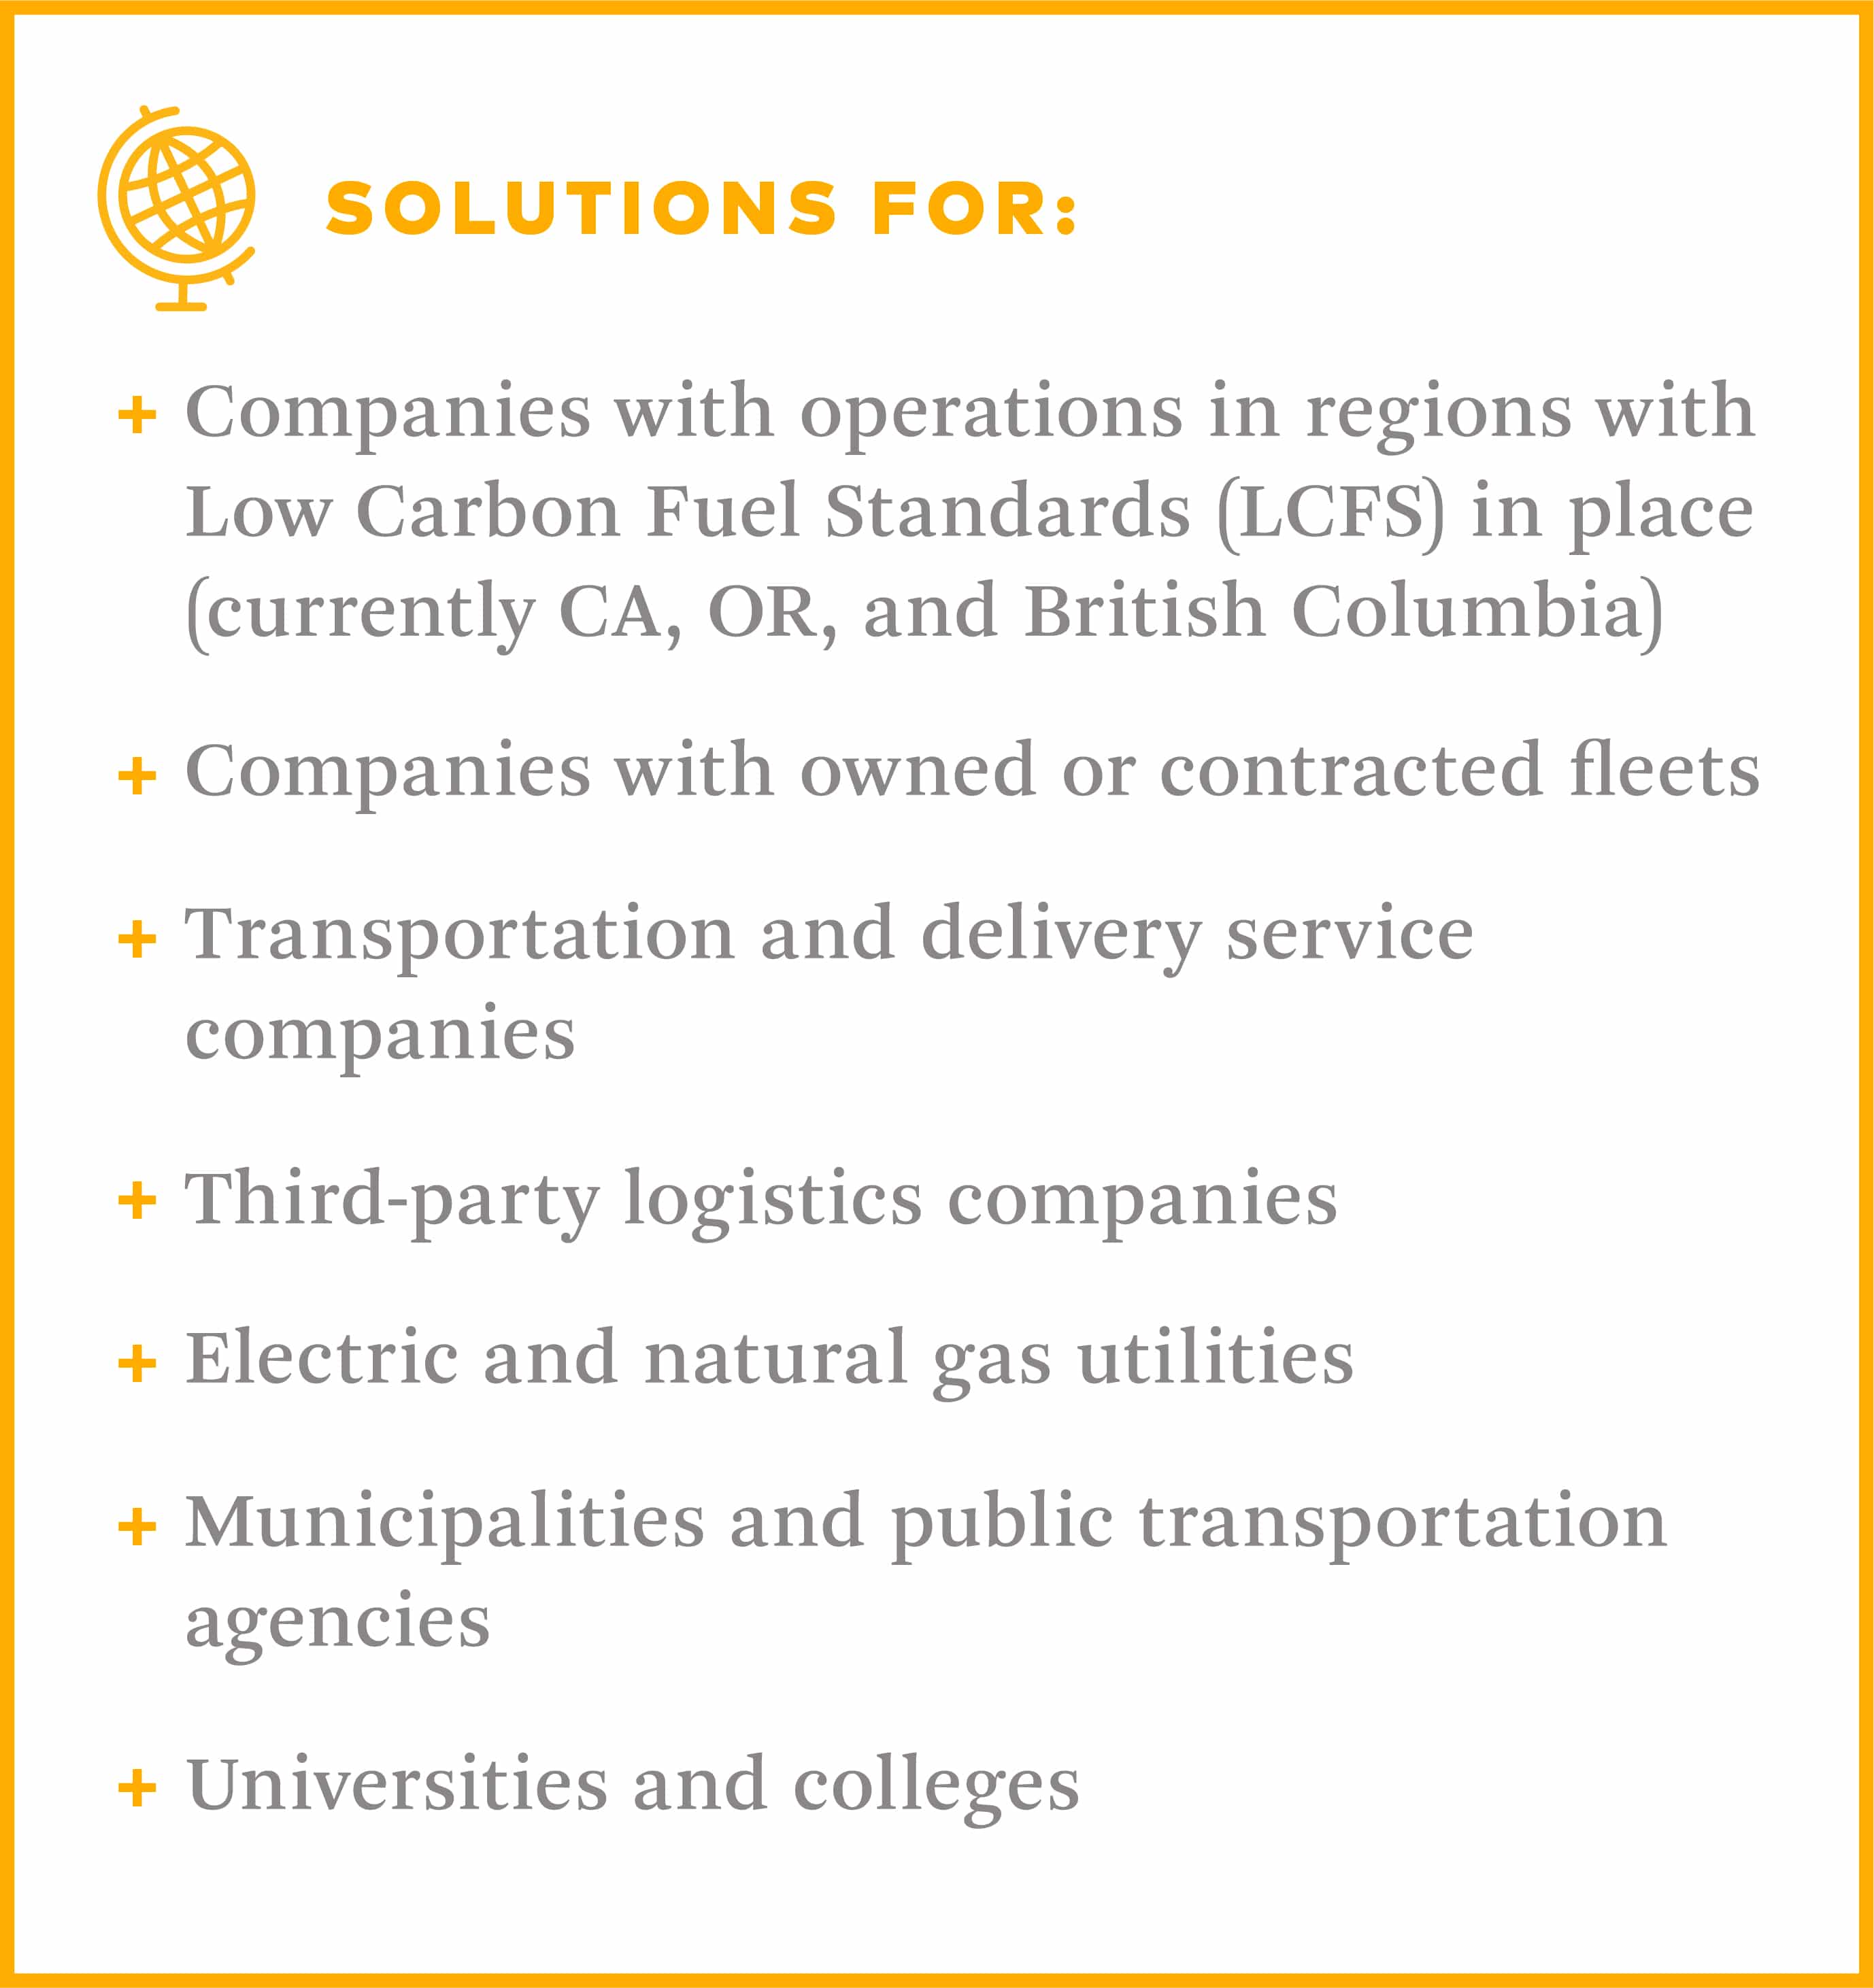 Transportation solutions for regions with low carbon fuel standards in place like california, oregon, and british columbia, companies with owned or contracted fleets, transportation and delivery service companies, third-party logistics companies, electric and natural gas utilities, municipalities and public transportation agencies, universities and colleges